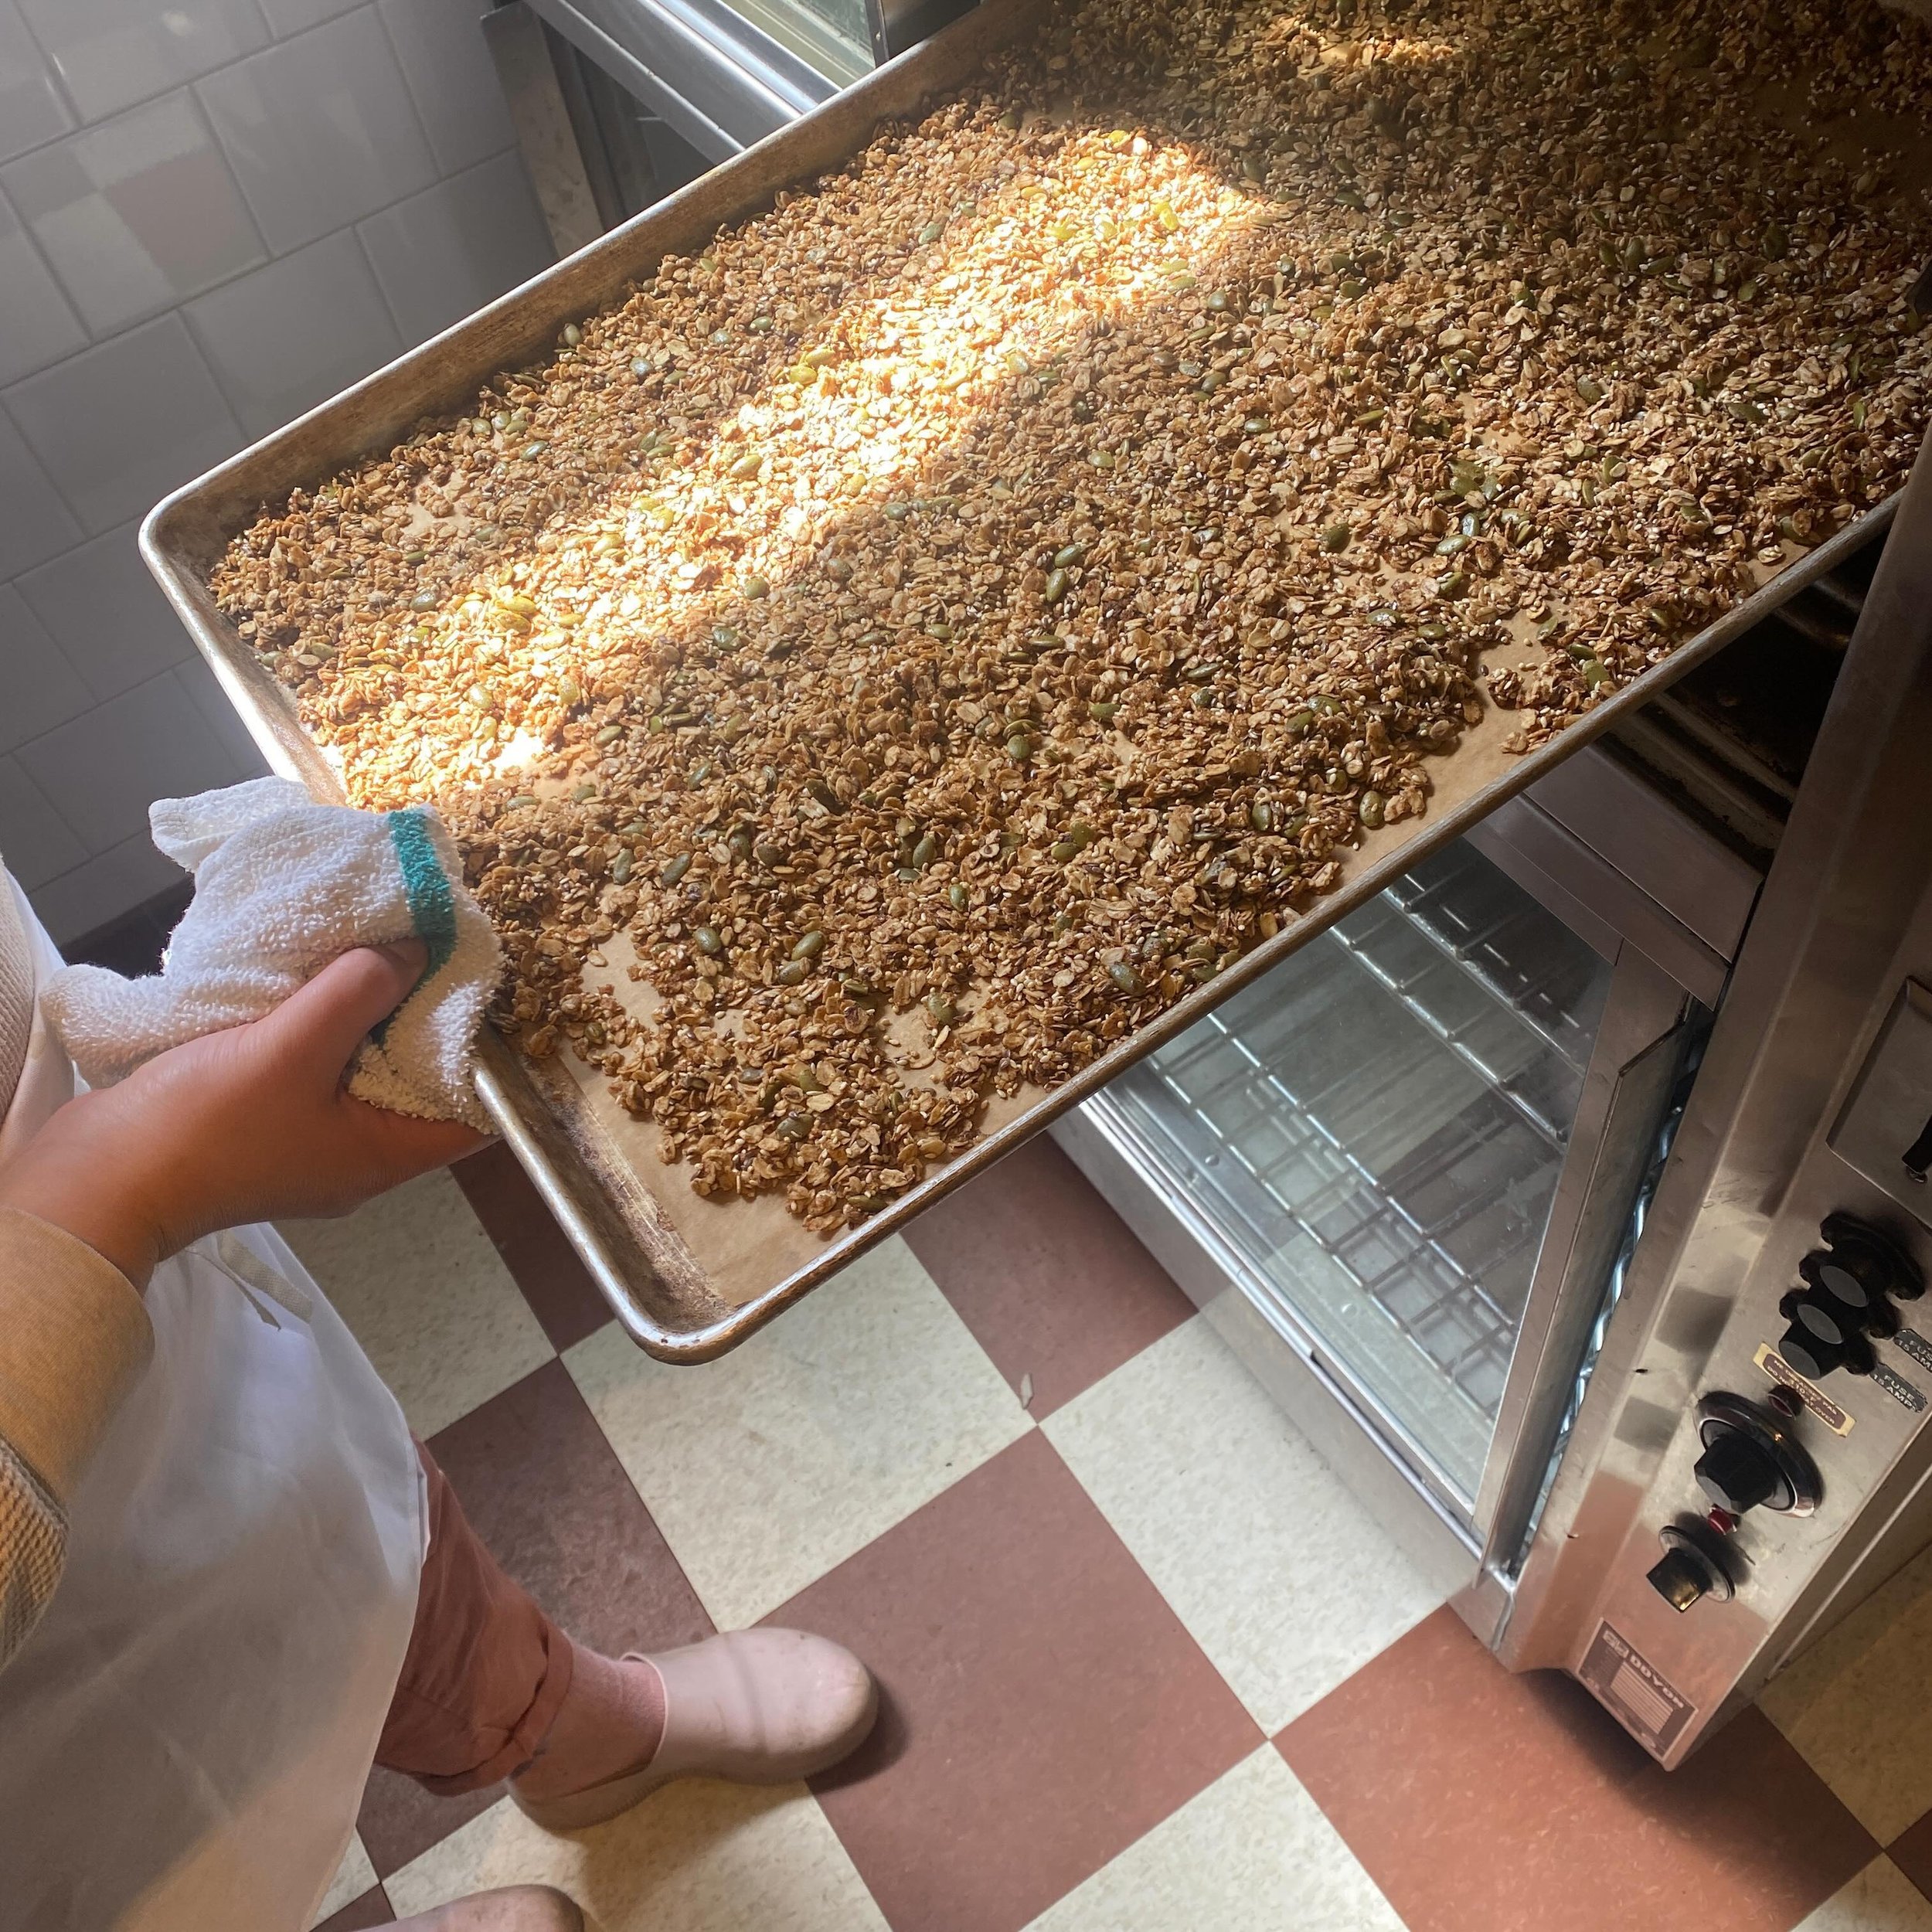 Monday mornings mean warm coffee and the smell of granola baking. 
.
.
.
#vancouverbakery #vancouvercoffee #vancouvercoffeeshop #supportsmallbusiness #supportlocal #qualityingredients #community